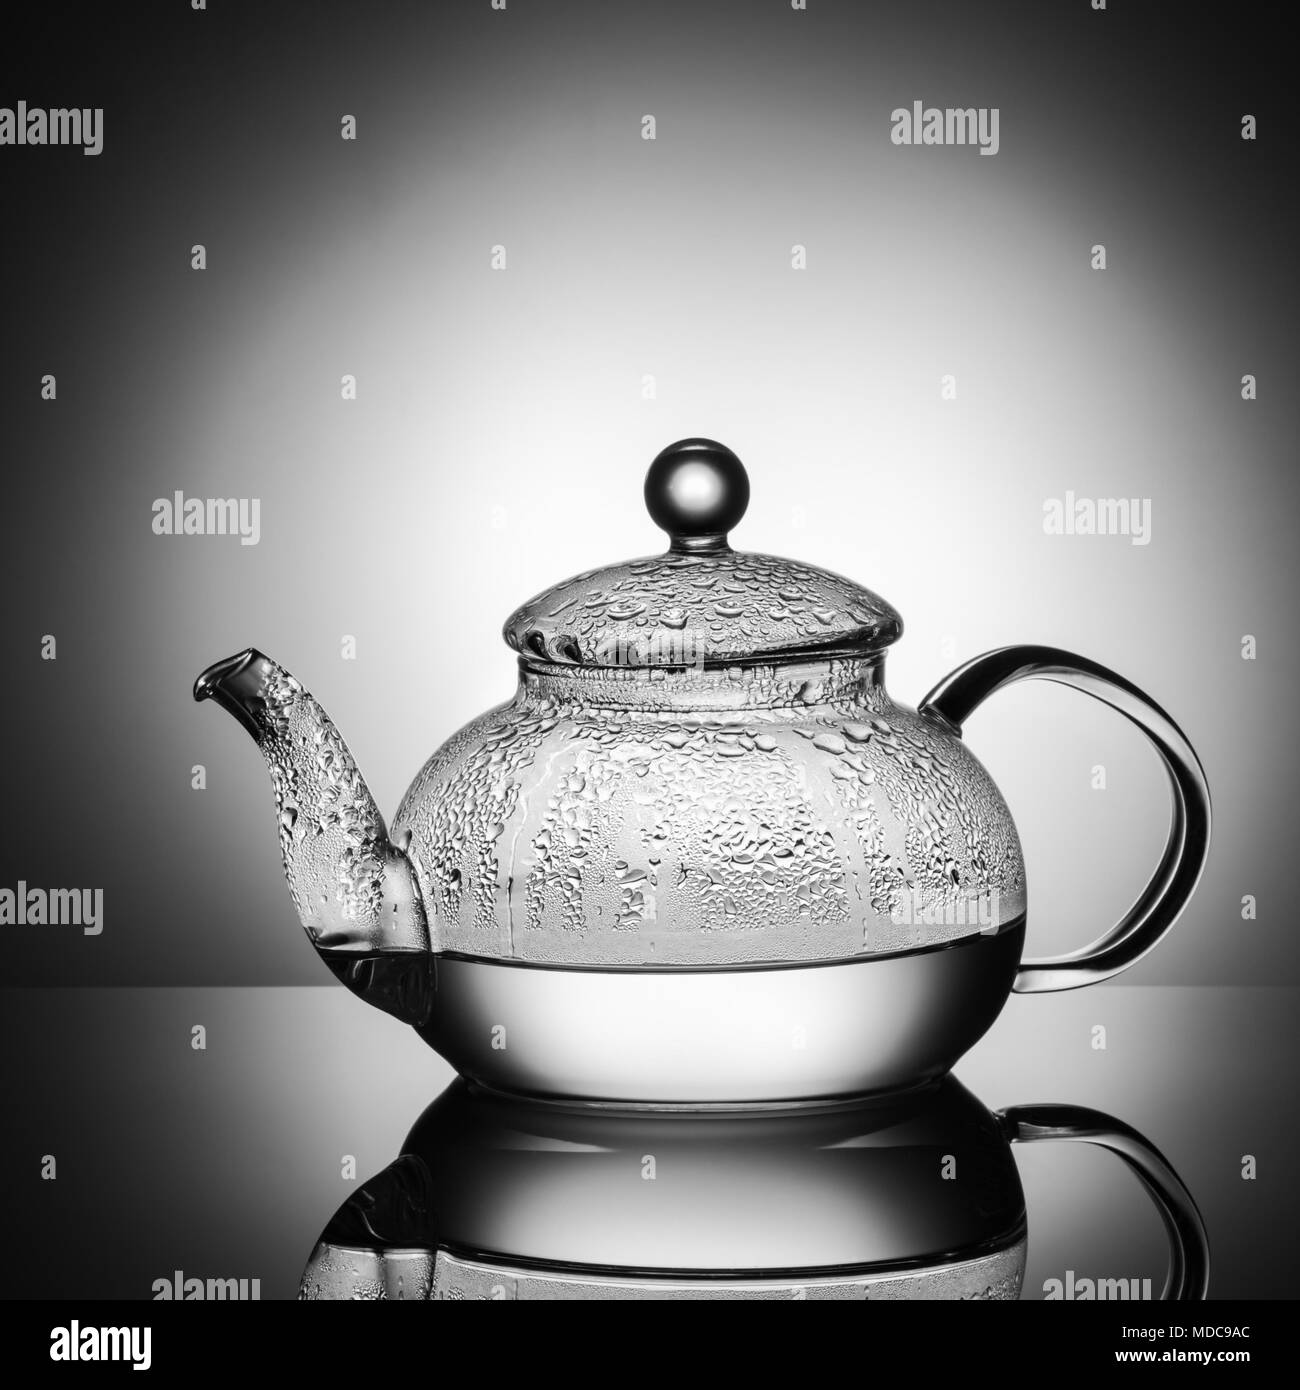 https://c8.alamy.com/comp/MDC9AC/glass-teapot-with-boiling-water-and-drops-of-condensation-on-glass-advertising-shot-on-light-black-and-white-background-with-realistic-reflection-of-g-MDC9AC.jpg